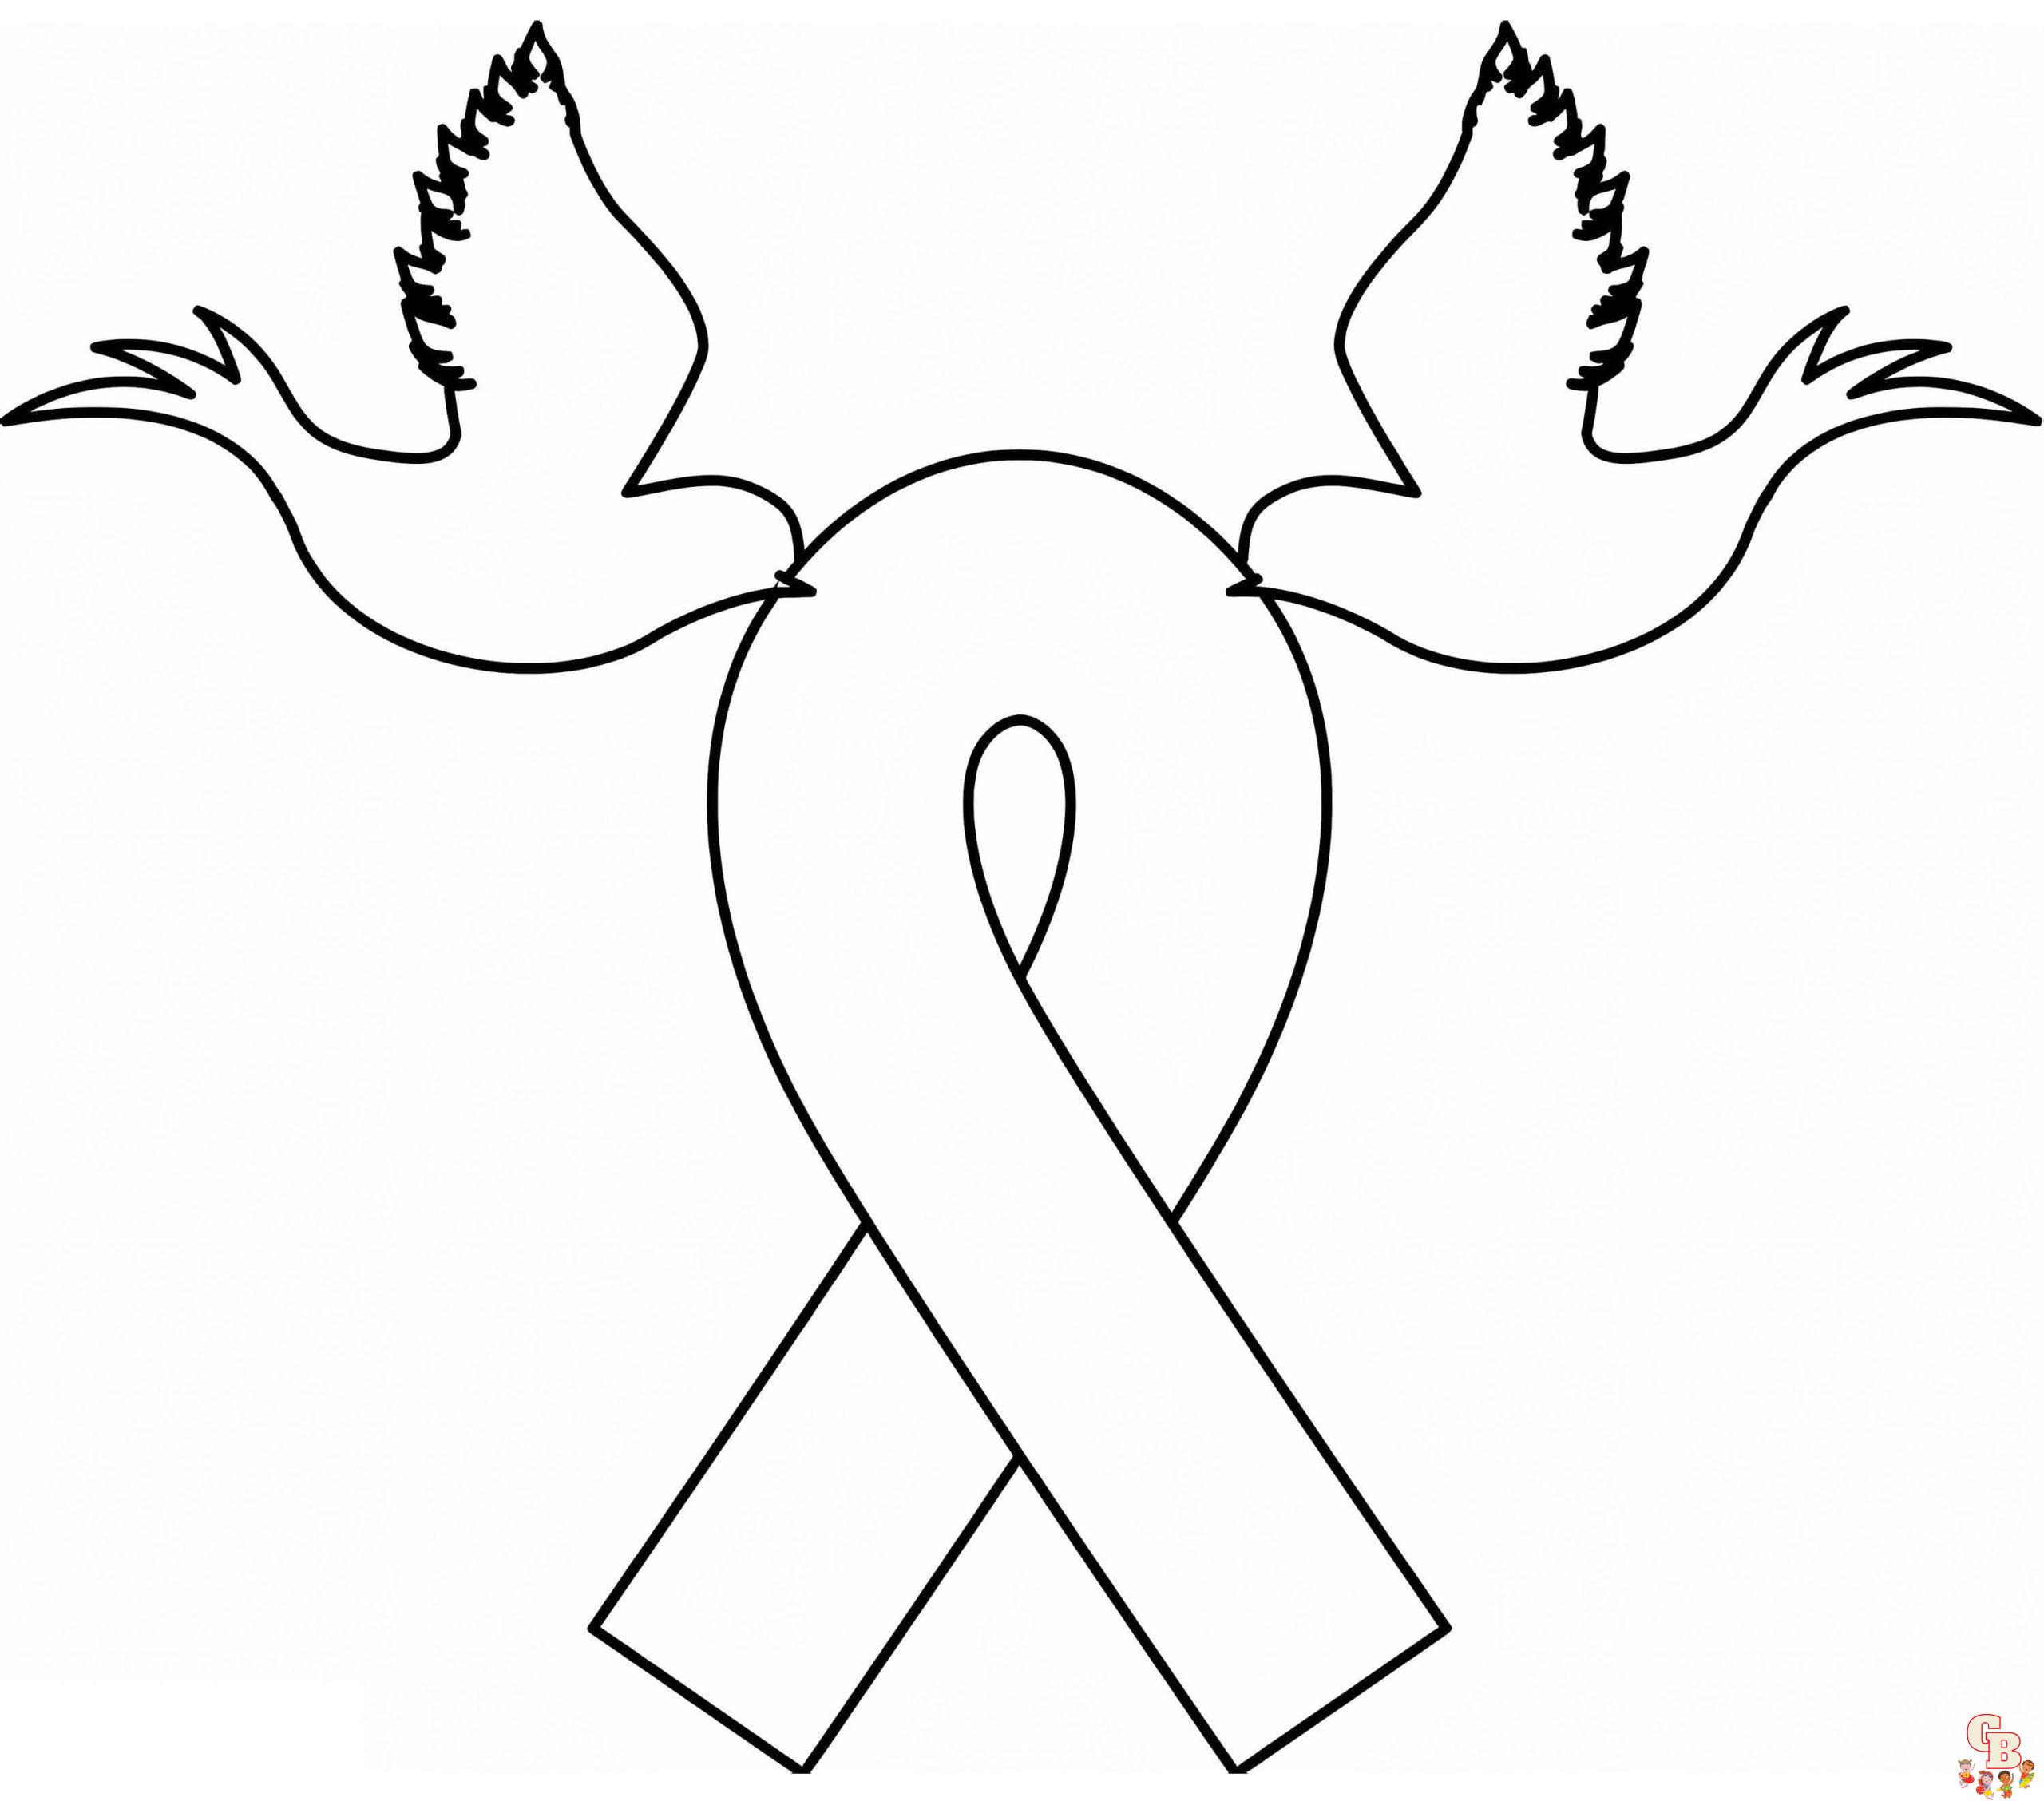 Printable breast cancer awareness coloring pages free